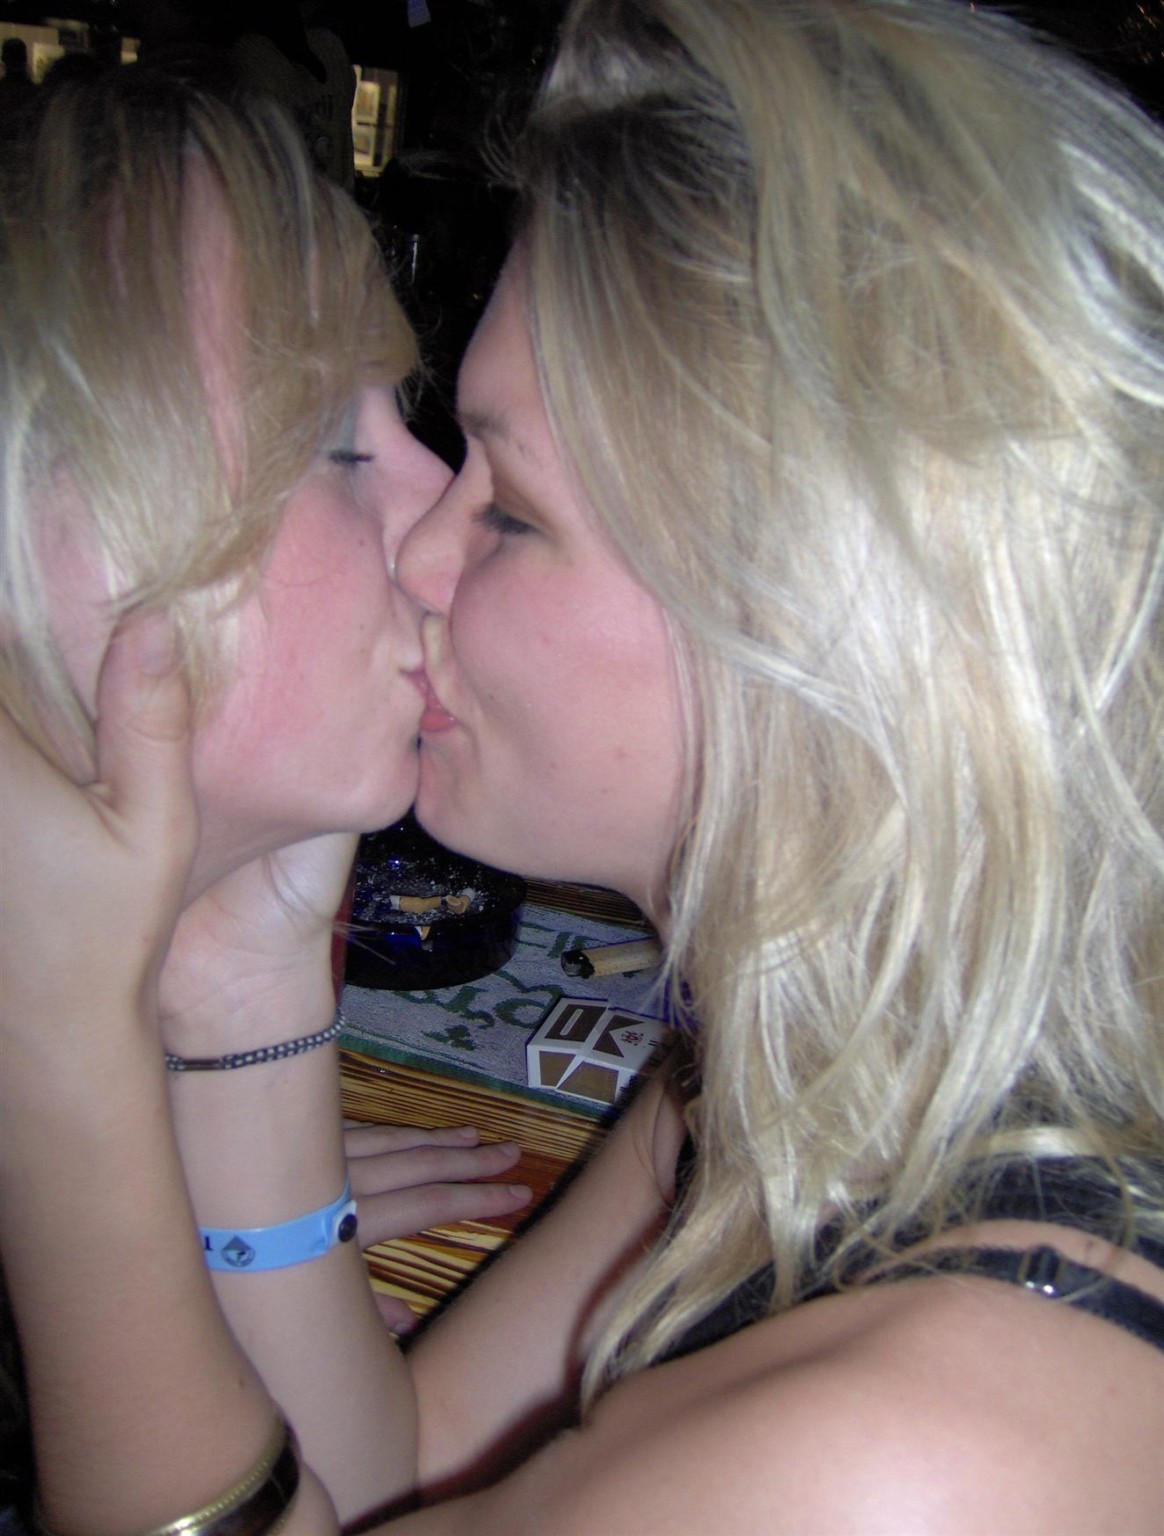 Pictures of a chick's threesome escapade with her boyfriend and best friend #68062221